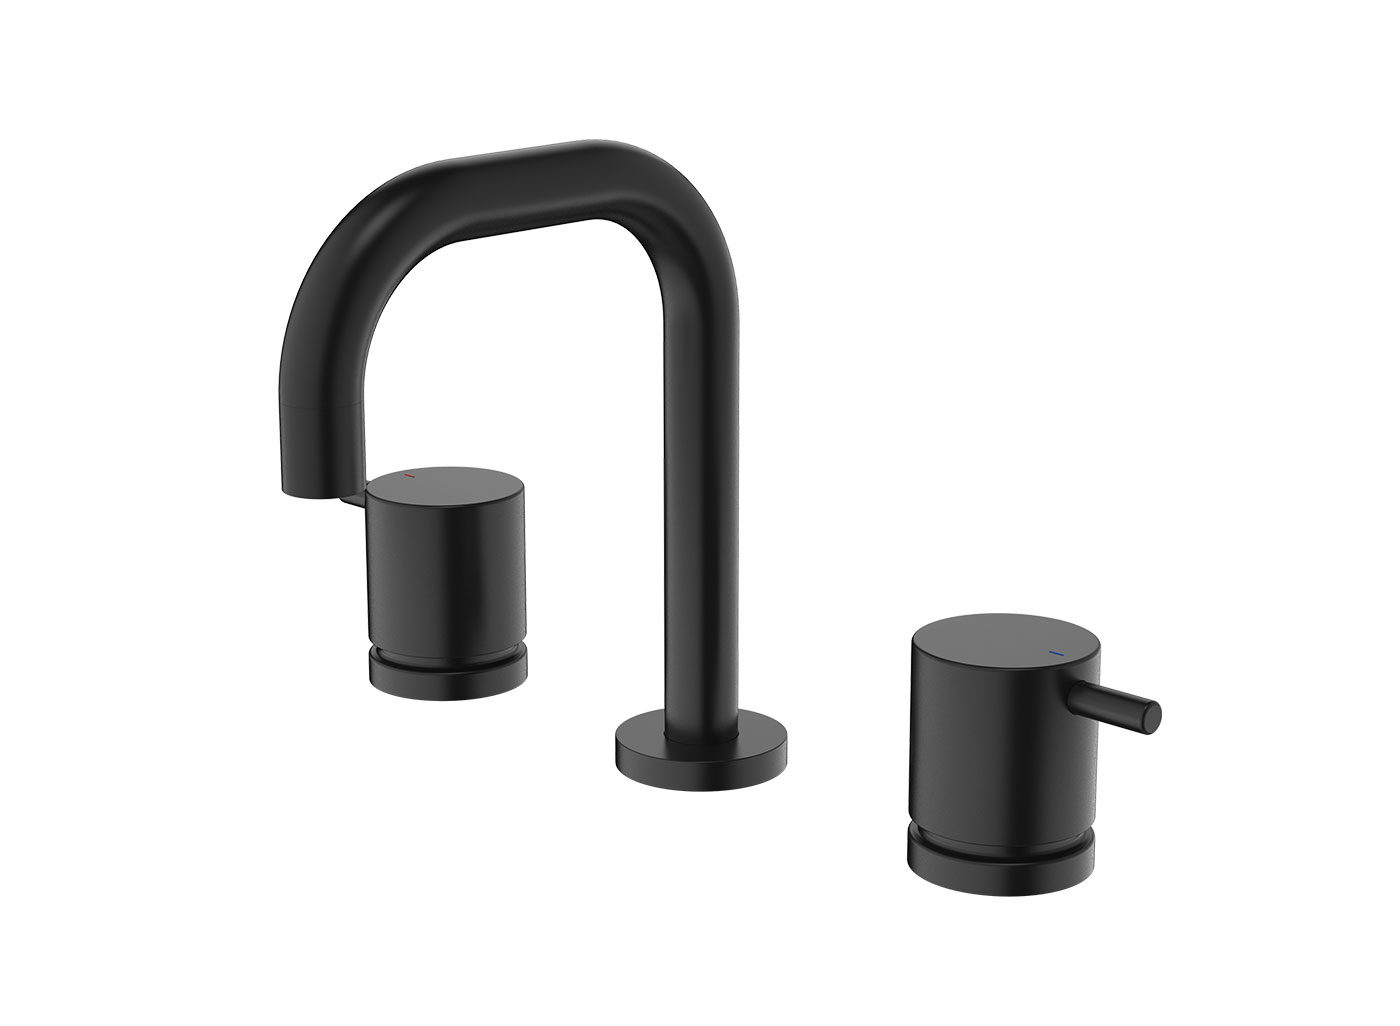 The Luna collection offers timeless and enduring bathroom essentials that are well-designed with Australian ingenuity to suit your lifestyle. The extensive product range features soft curves and sleek